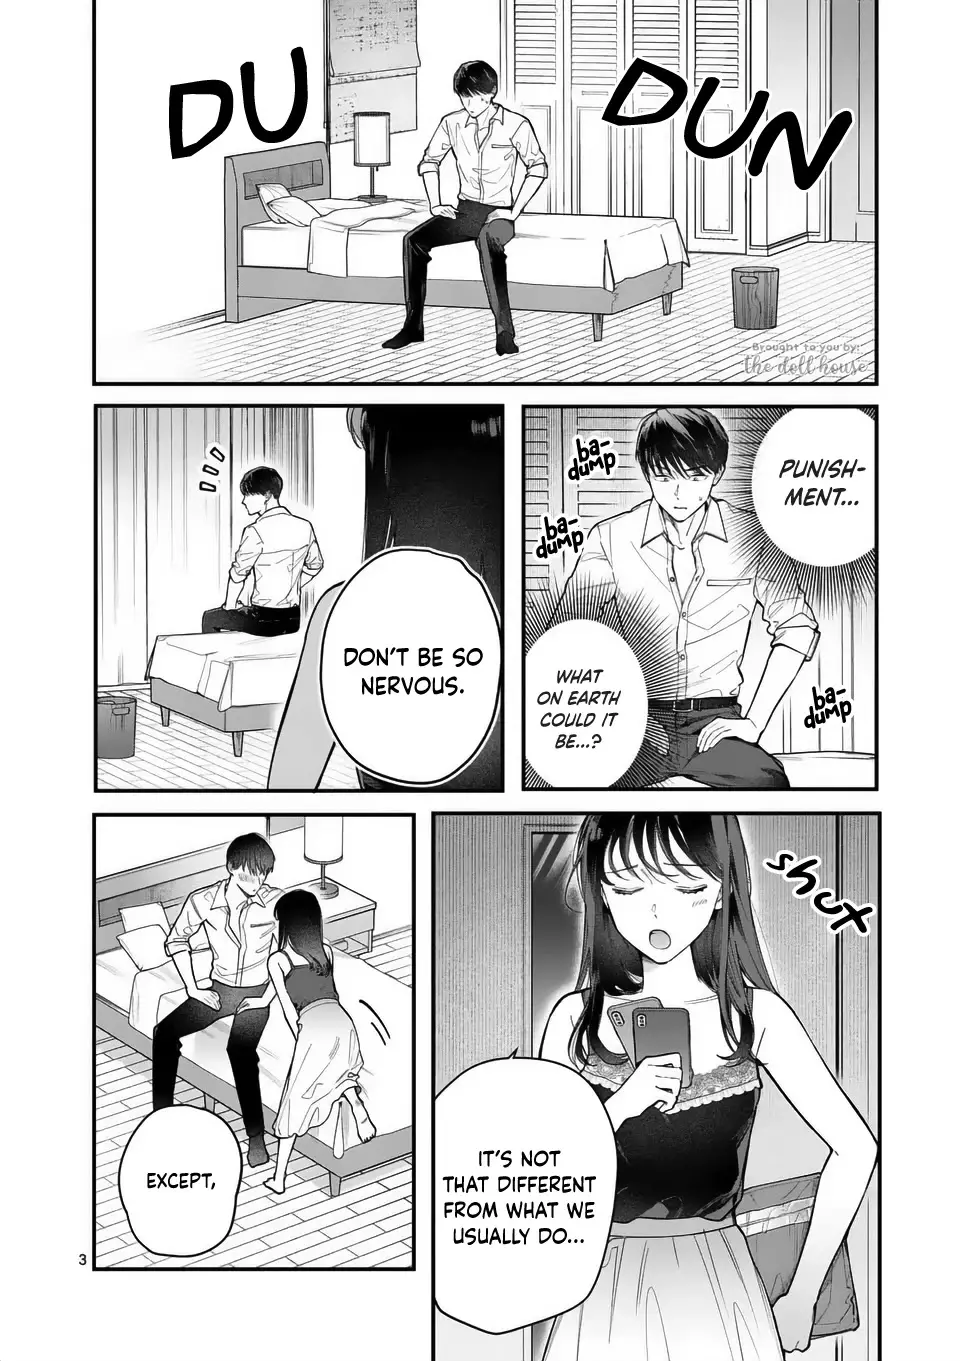 Is It Wrong To Get Done By A Girl? - 11 page 4